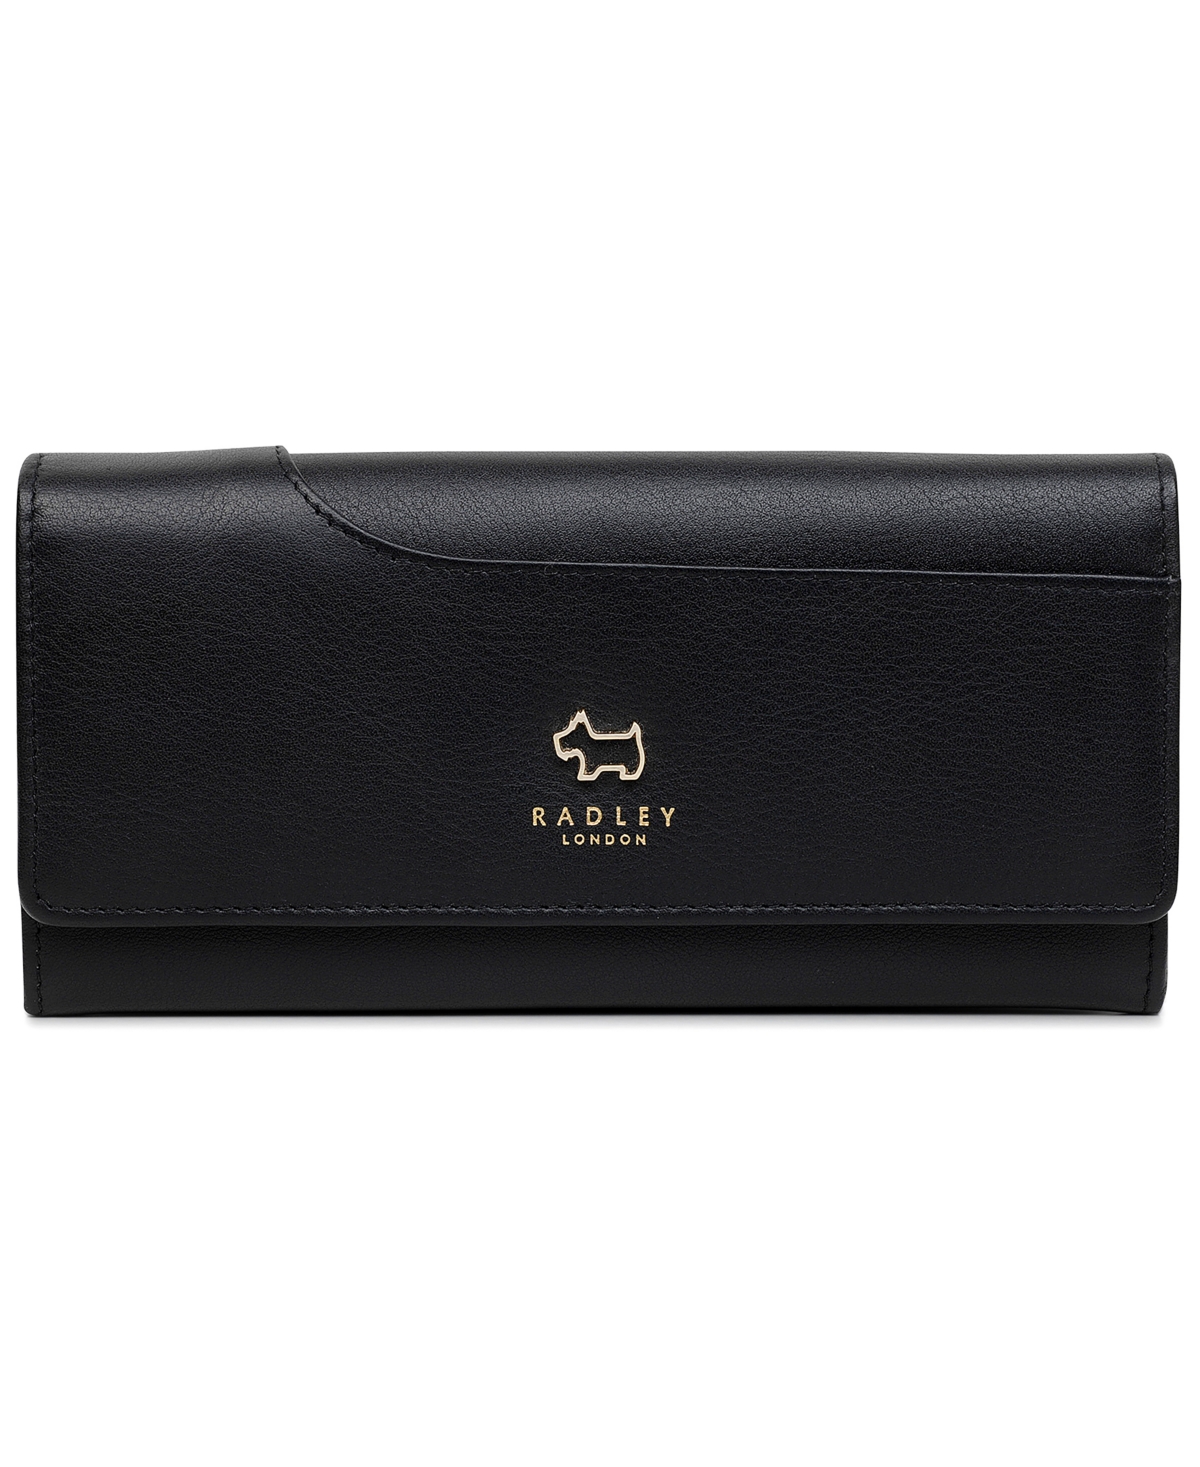 Radley London Large Flapover Leather Wallet In Black